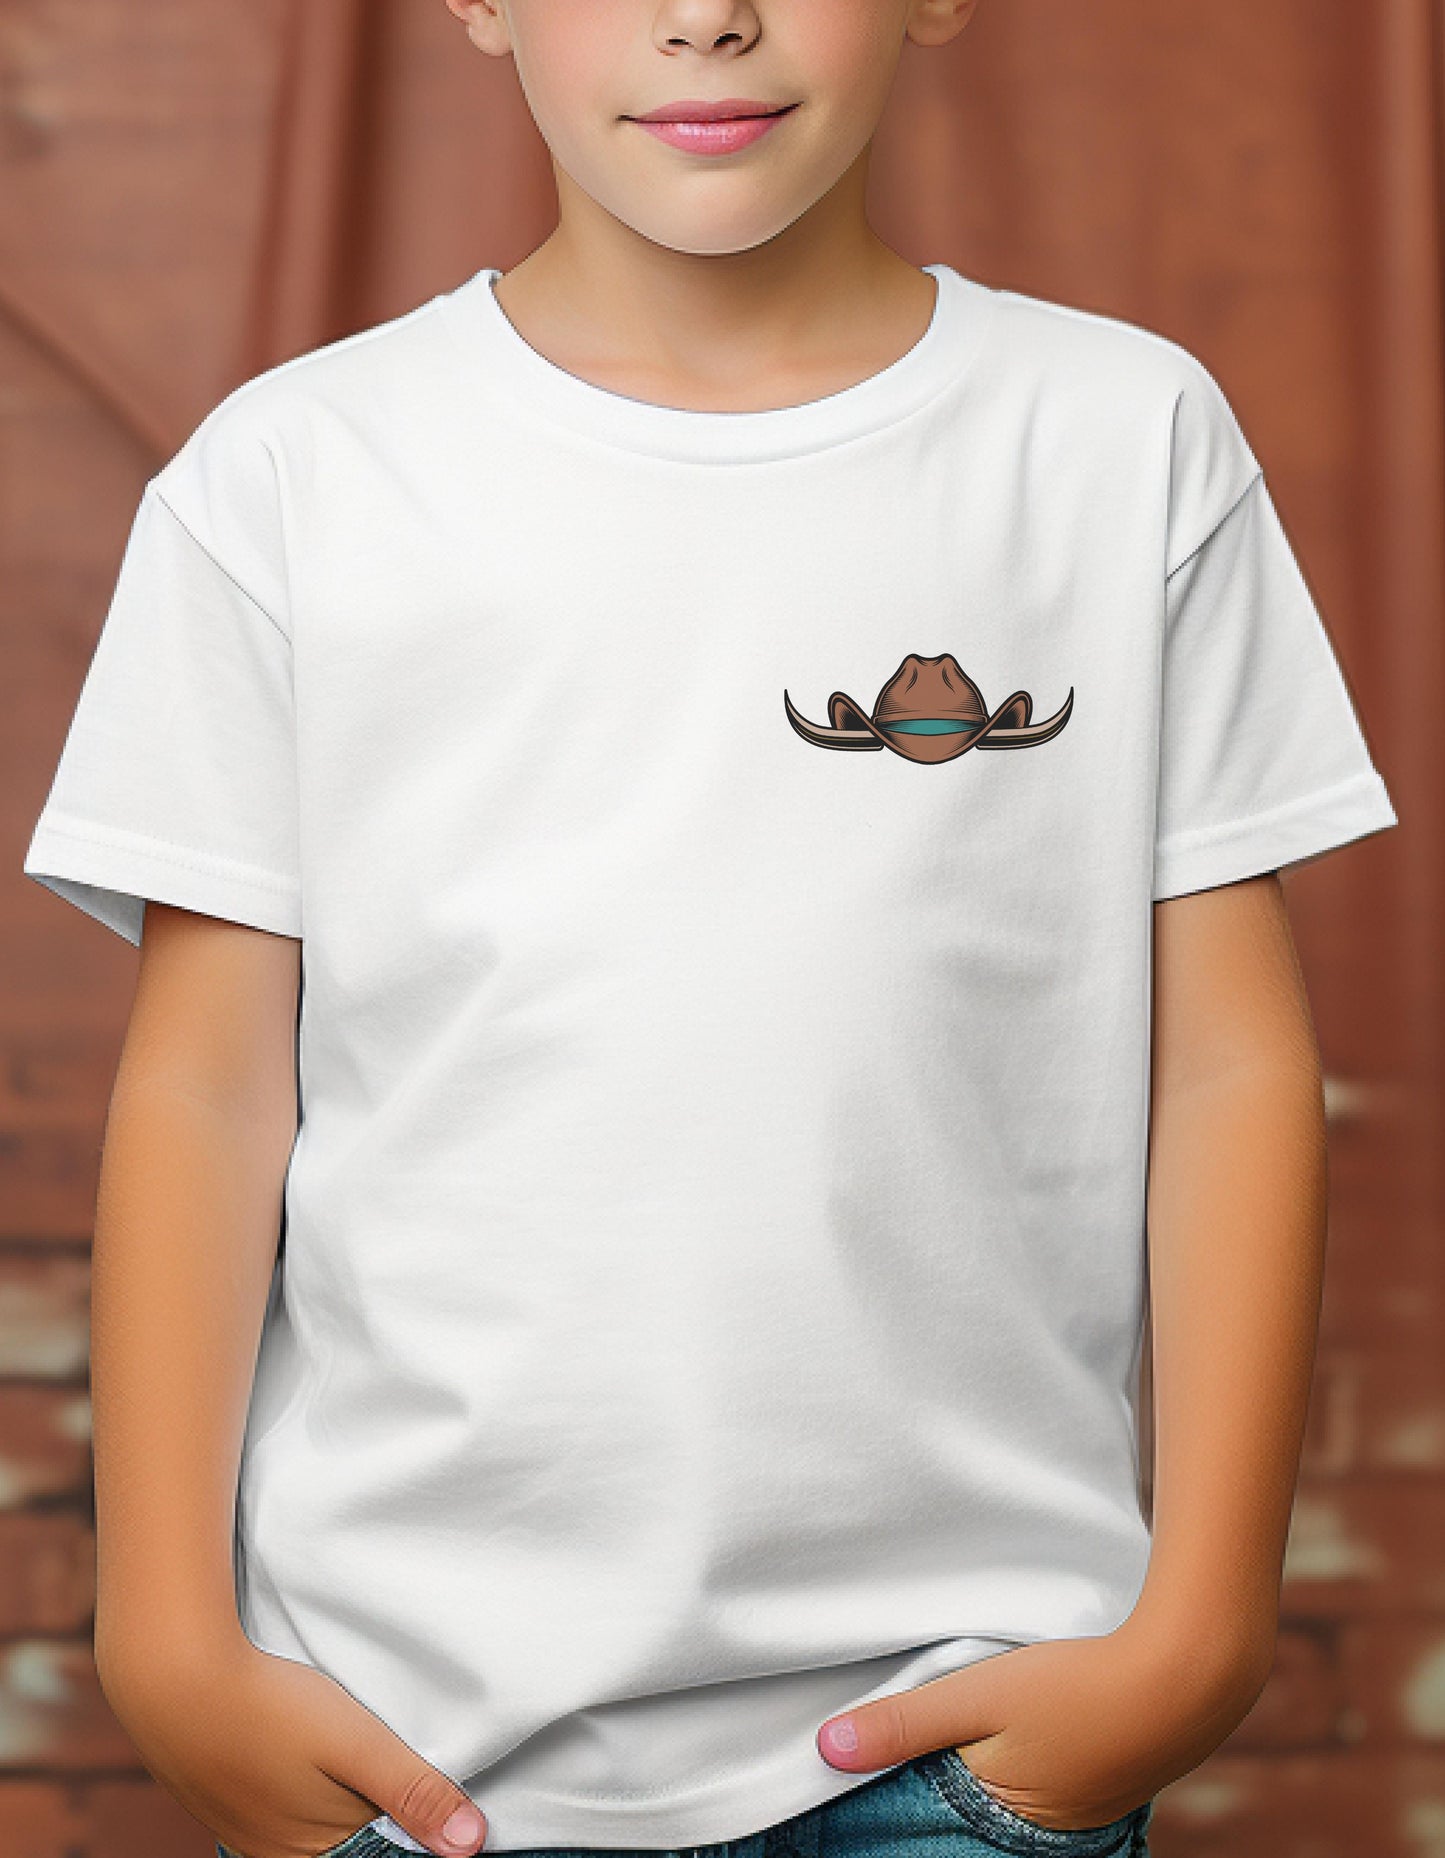 BORN TO BE A COWBOY TEE